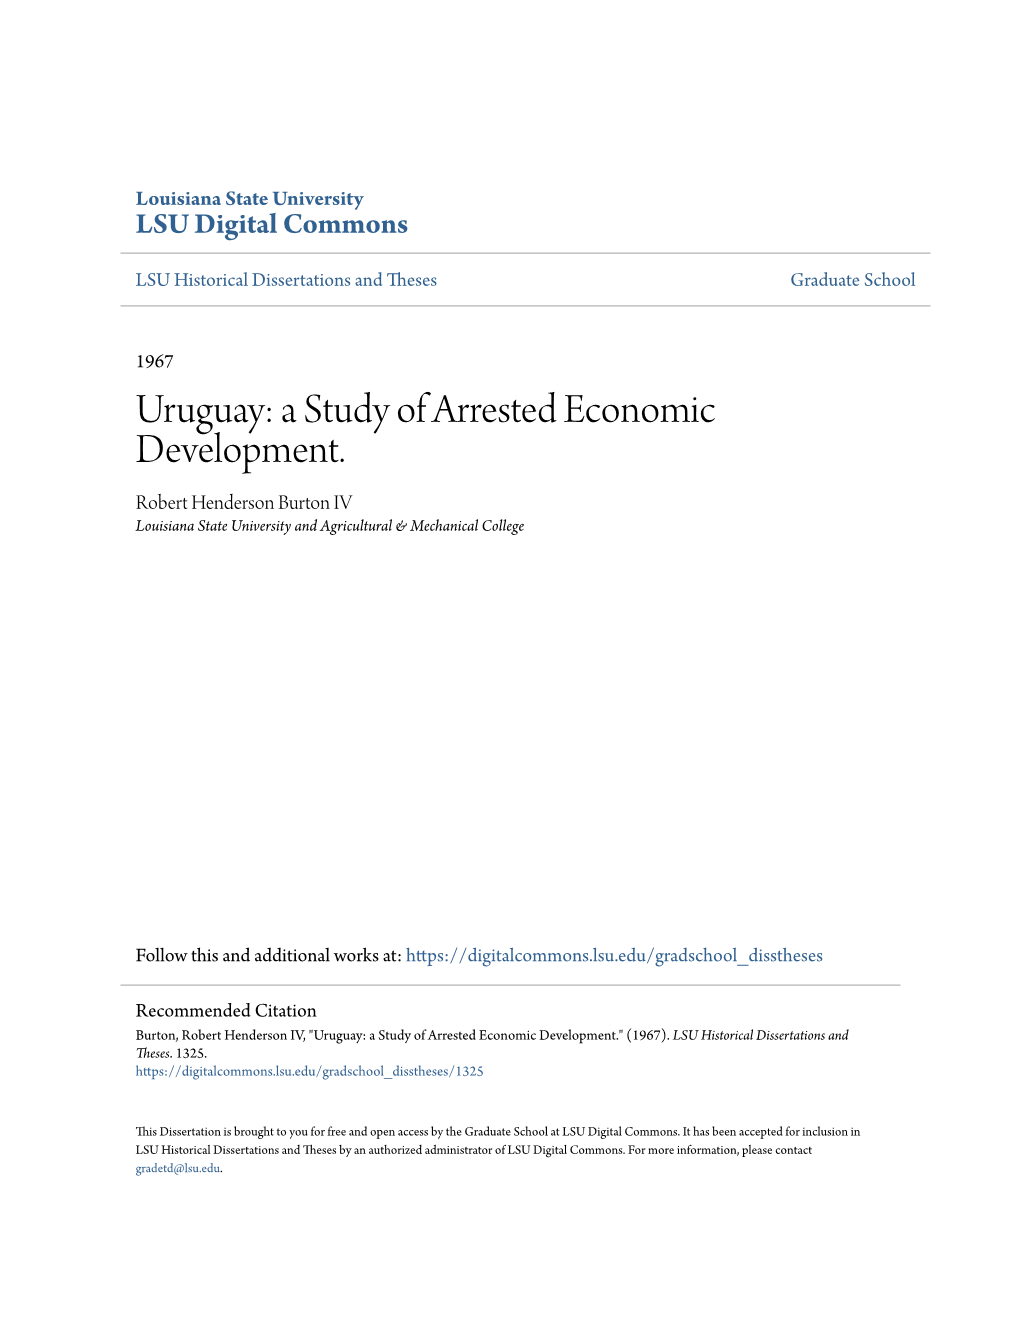 Uruguay: a Study of Arrested Economic Development. Robert Henderson Burton IV Louisiana State University and Agricultural & Mechanical College